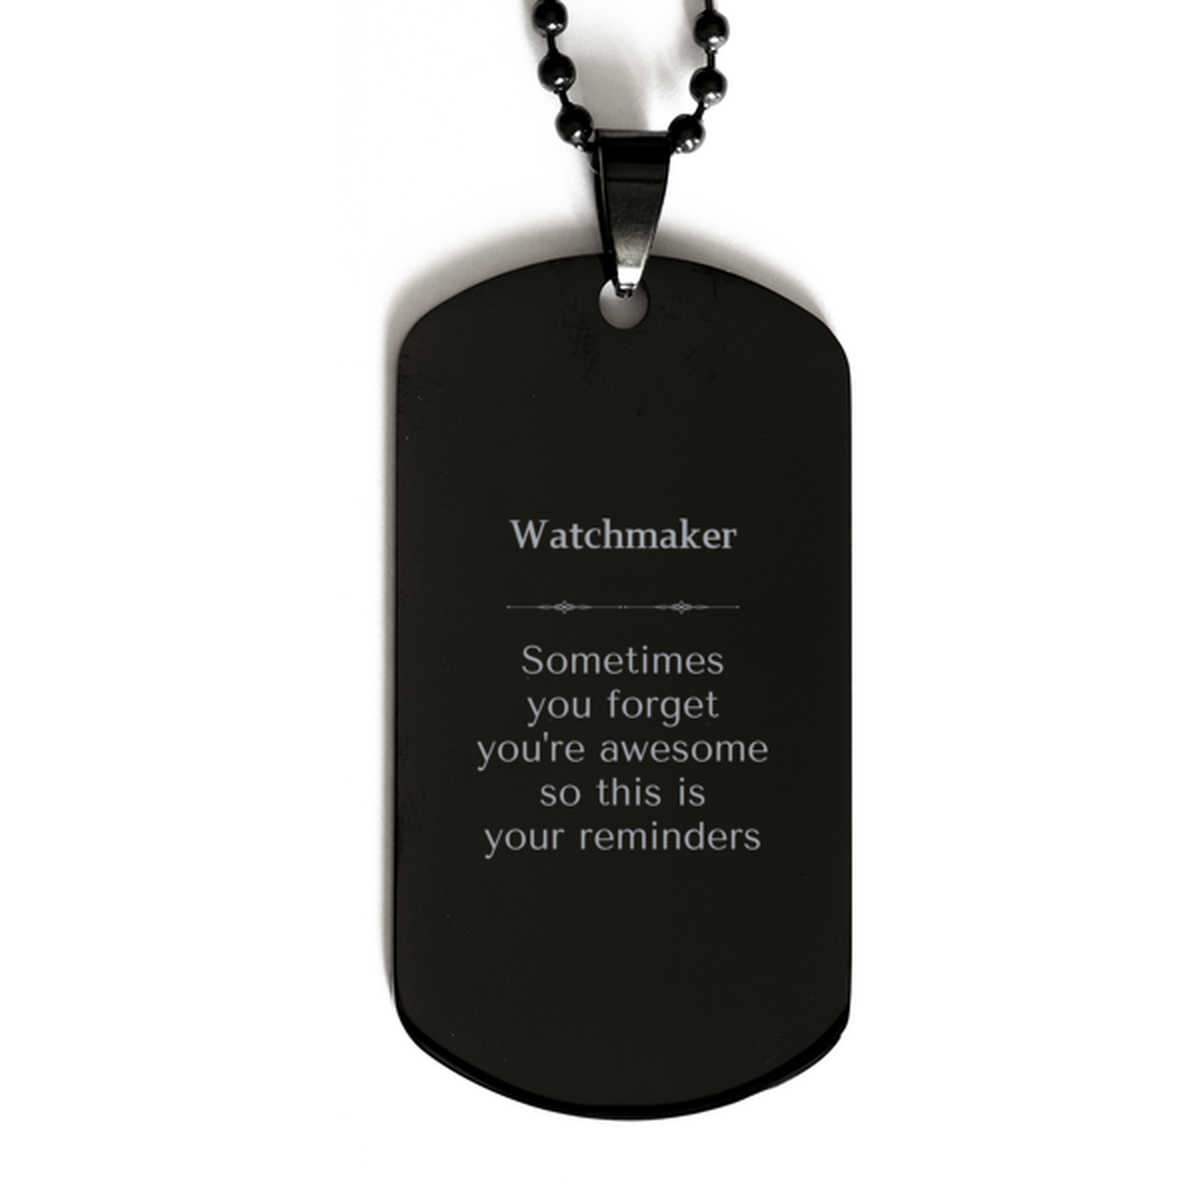 Sentimental Watchmaker Black Dog Tag, Watchmaker Sometimes you forget you're awesome so this is your reminders, Graduation Christmas Birthday Gifts for Watchmaker, Men, Women, Coworkers